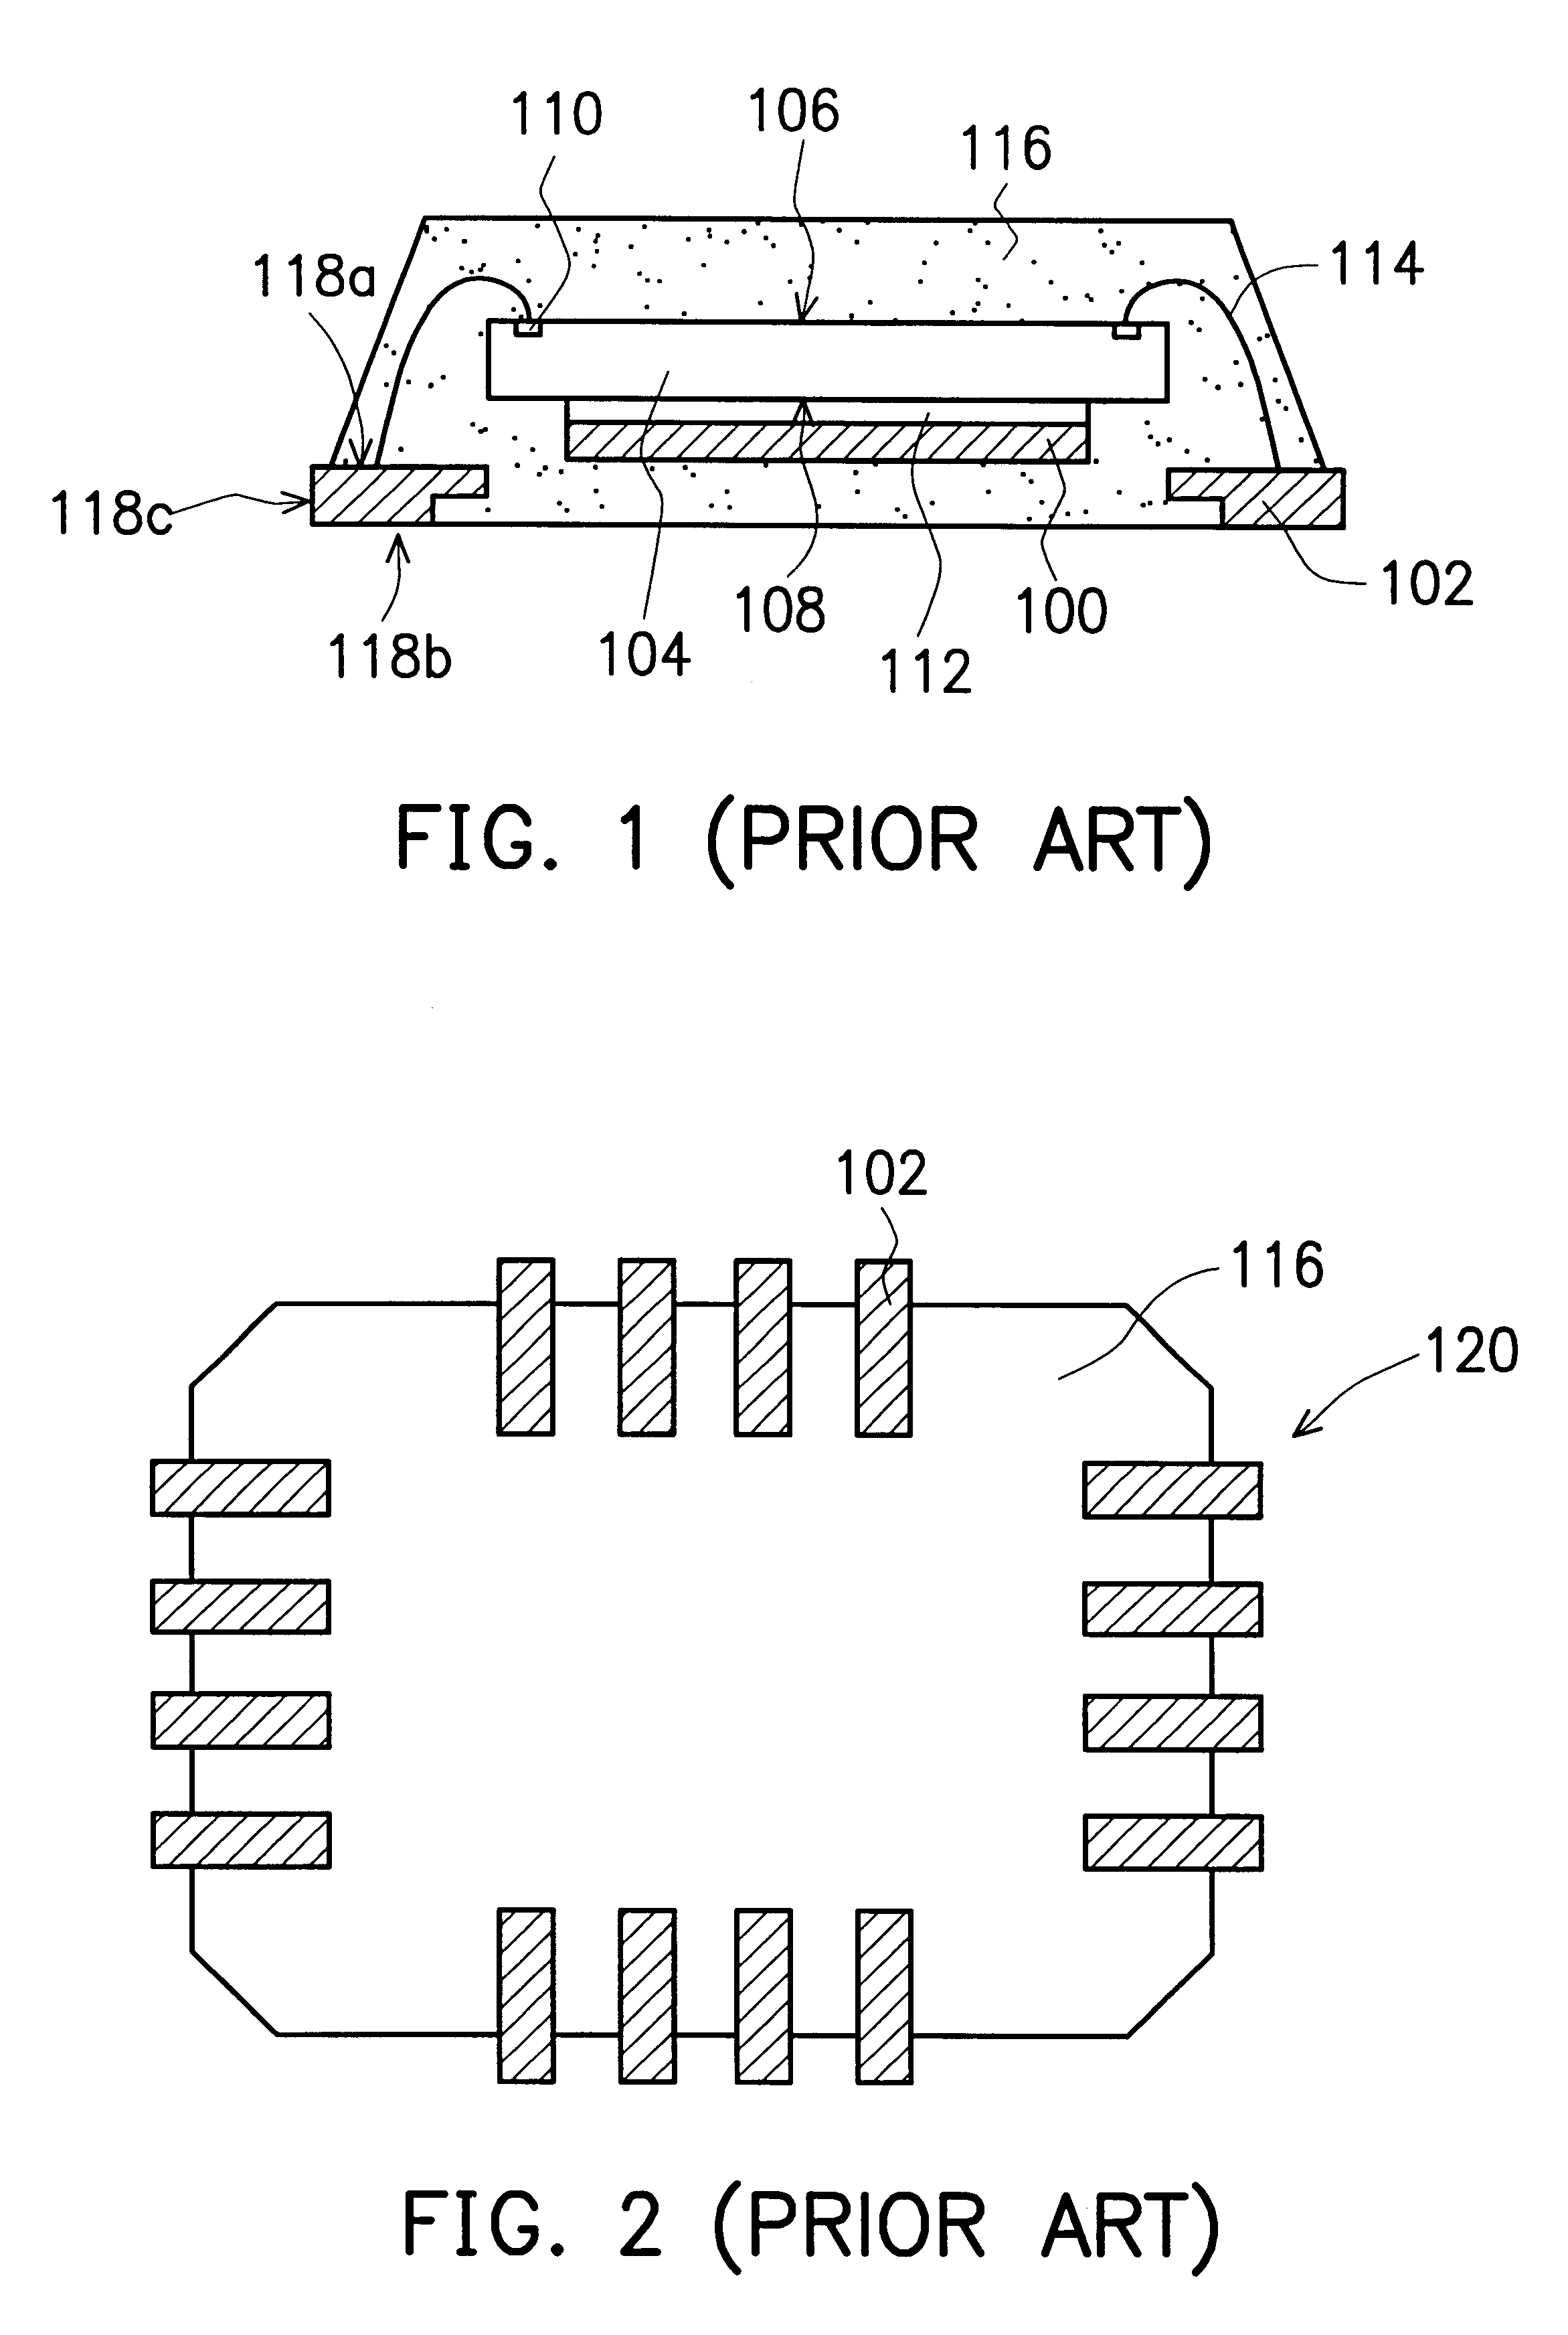 Quad flat non-lead package of semiconductor